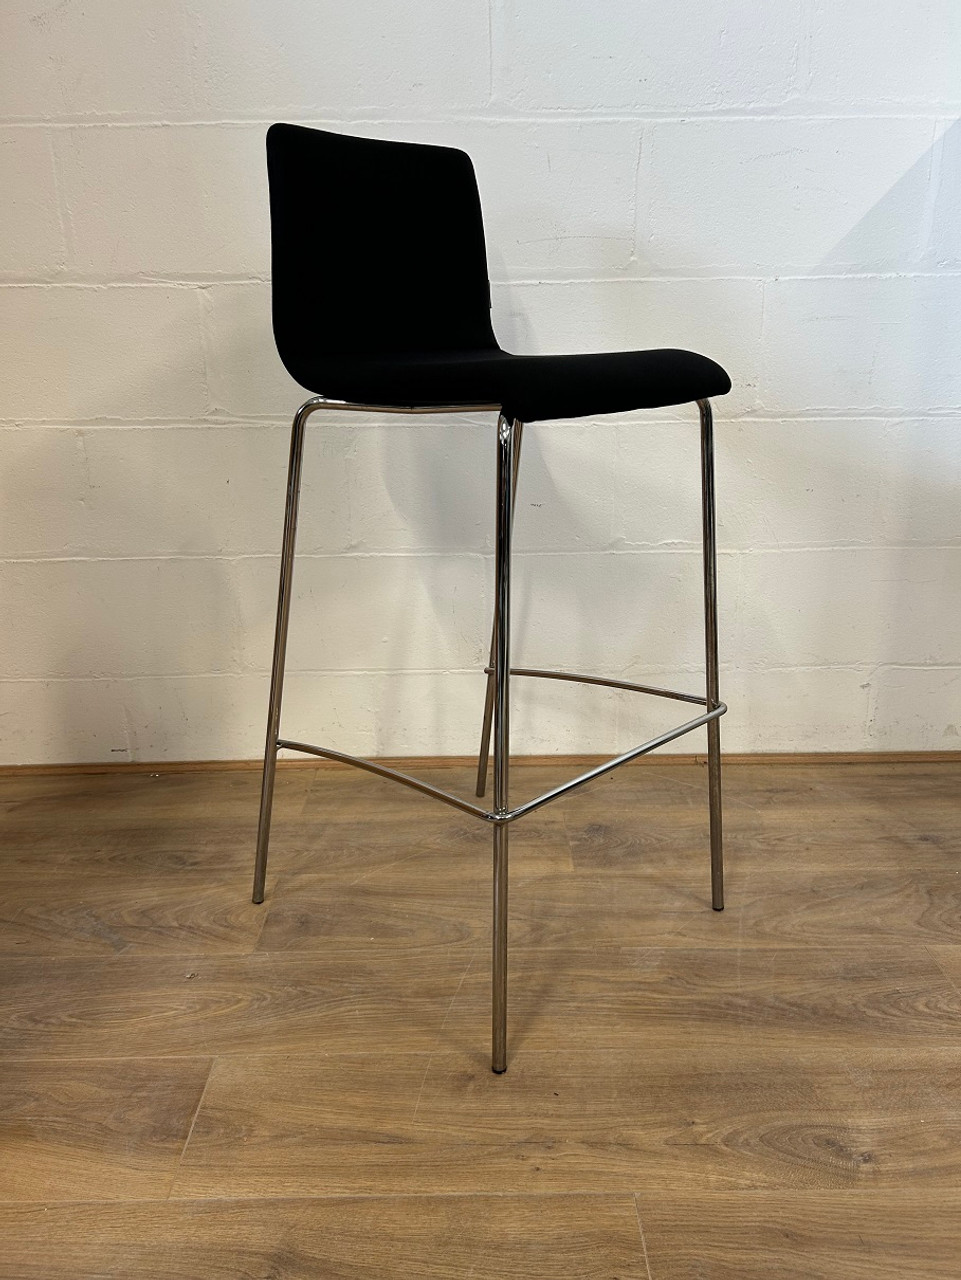 used narbutas moon stools_second hand narbuts moon stools_used office furniture essex 3